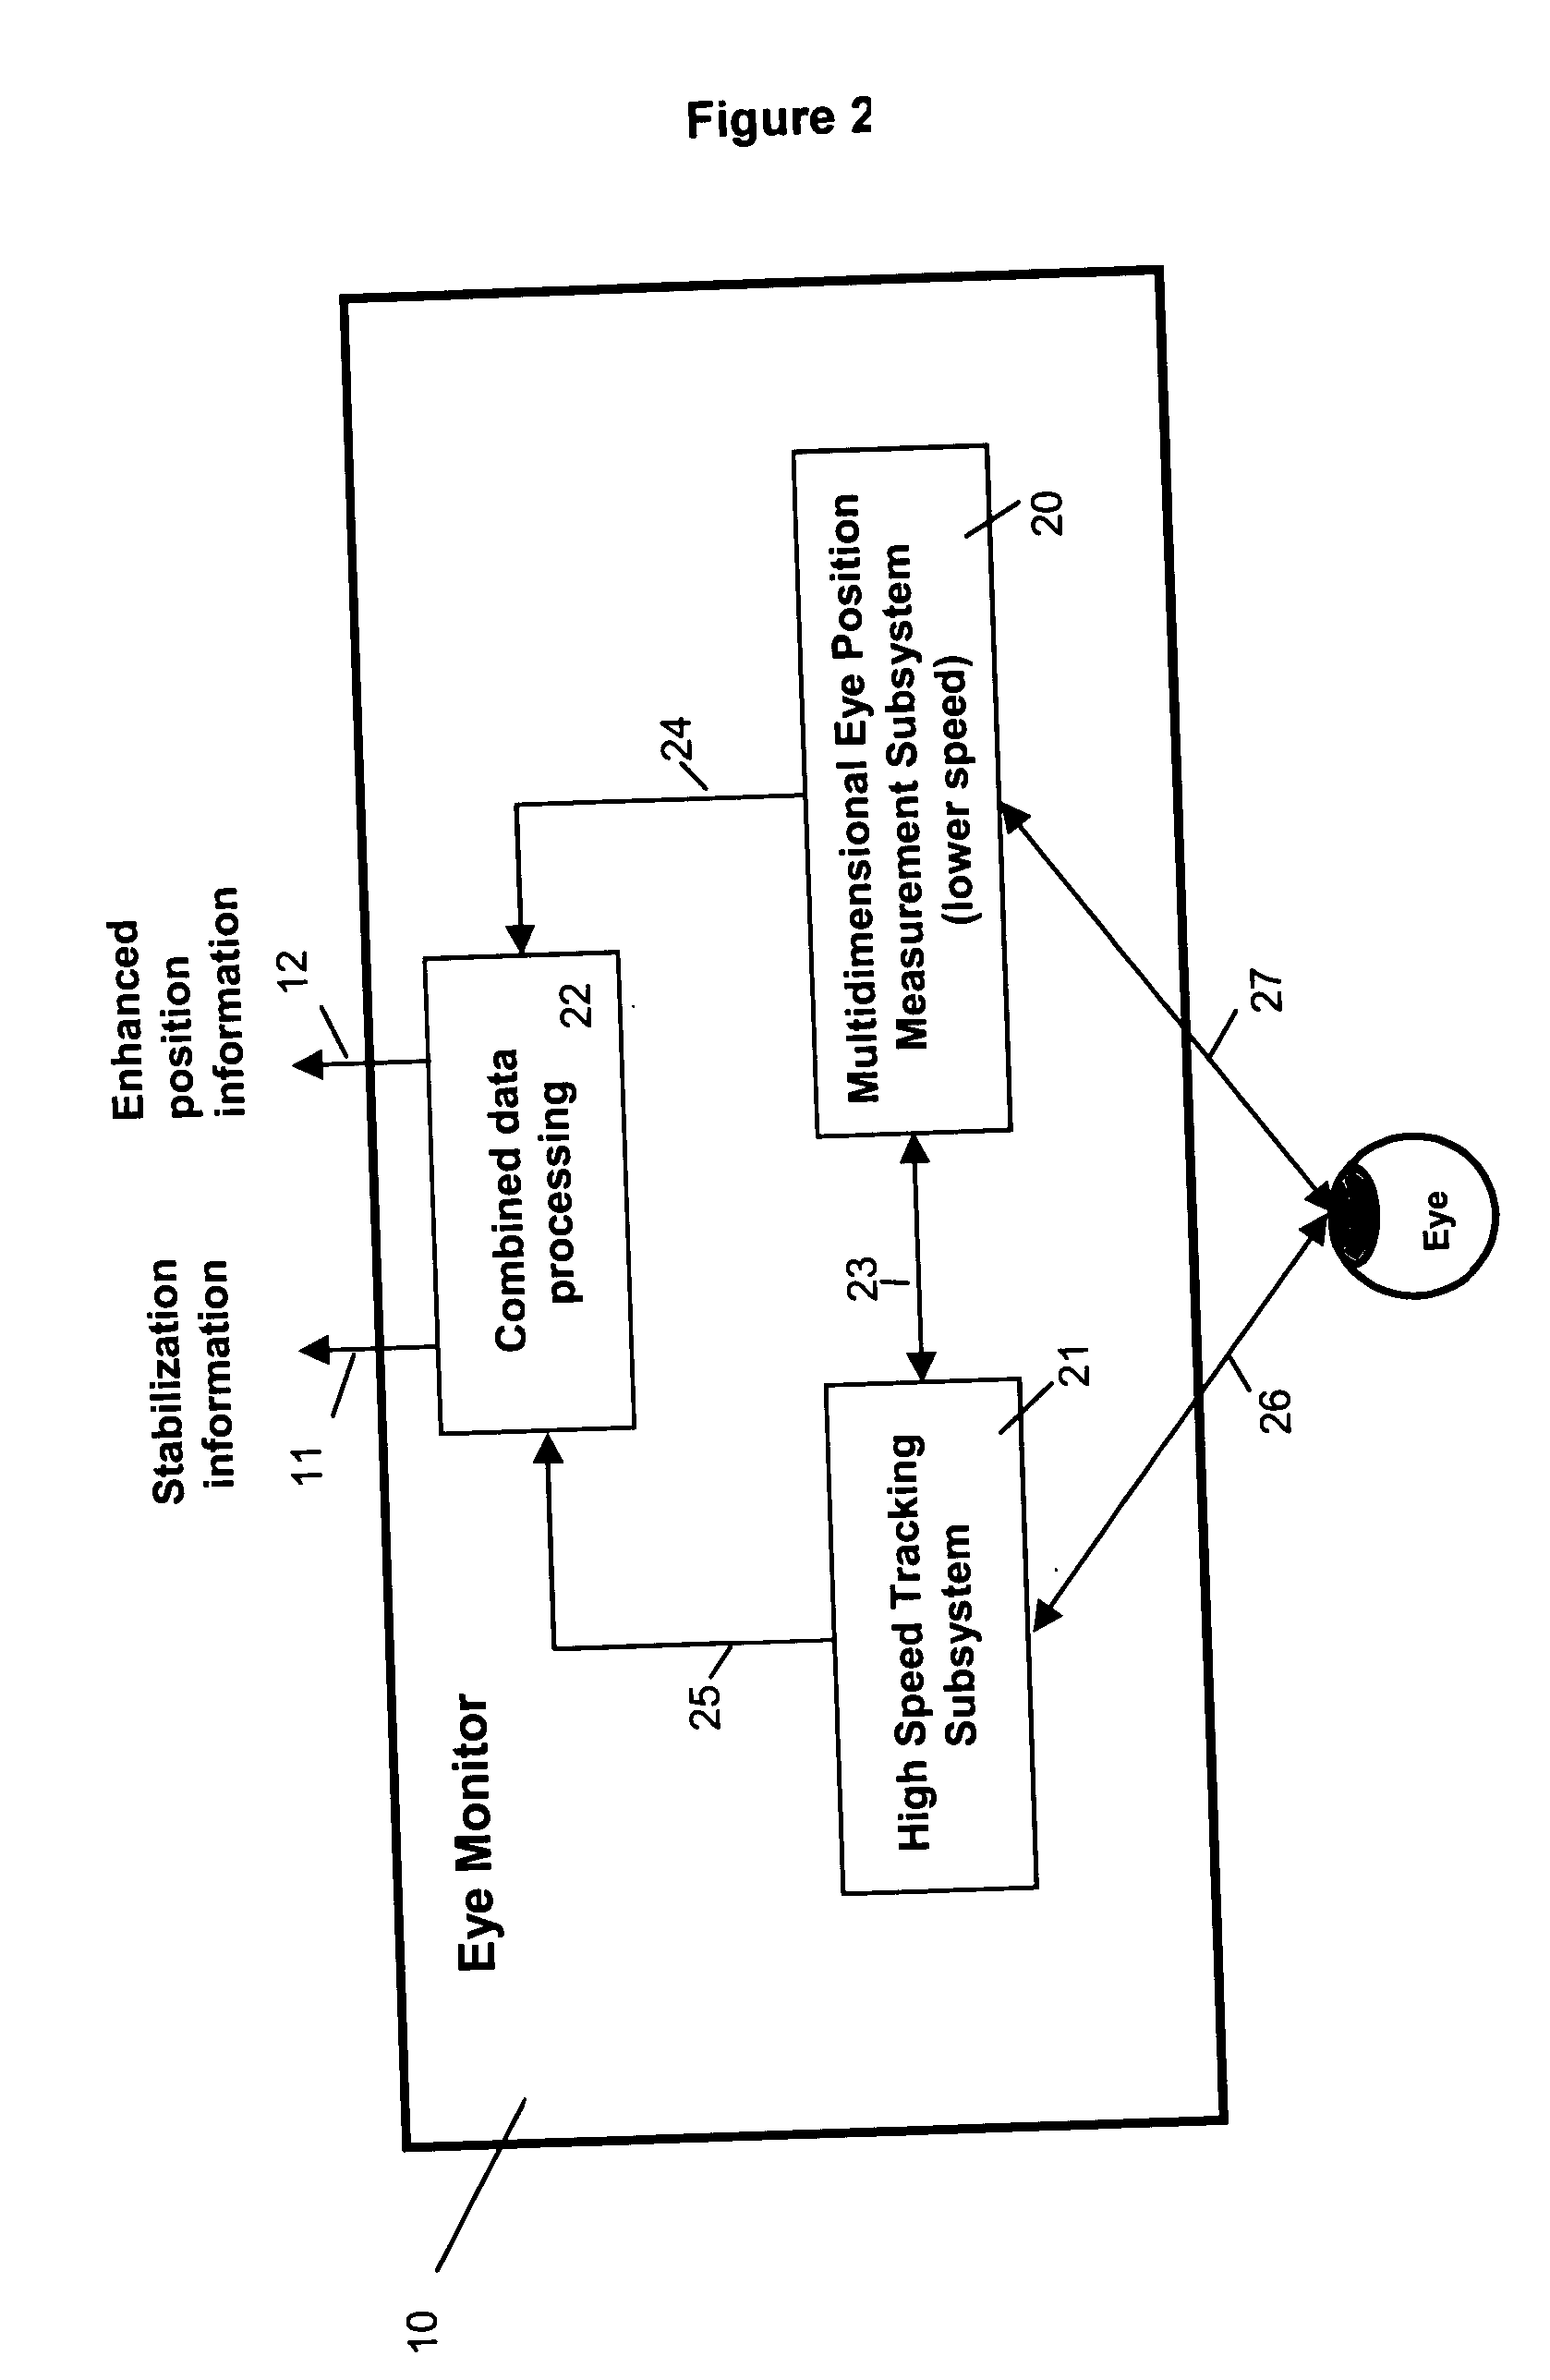 Multidimensional eye tracking and position measurement system for diagnosis and treatment of the eye